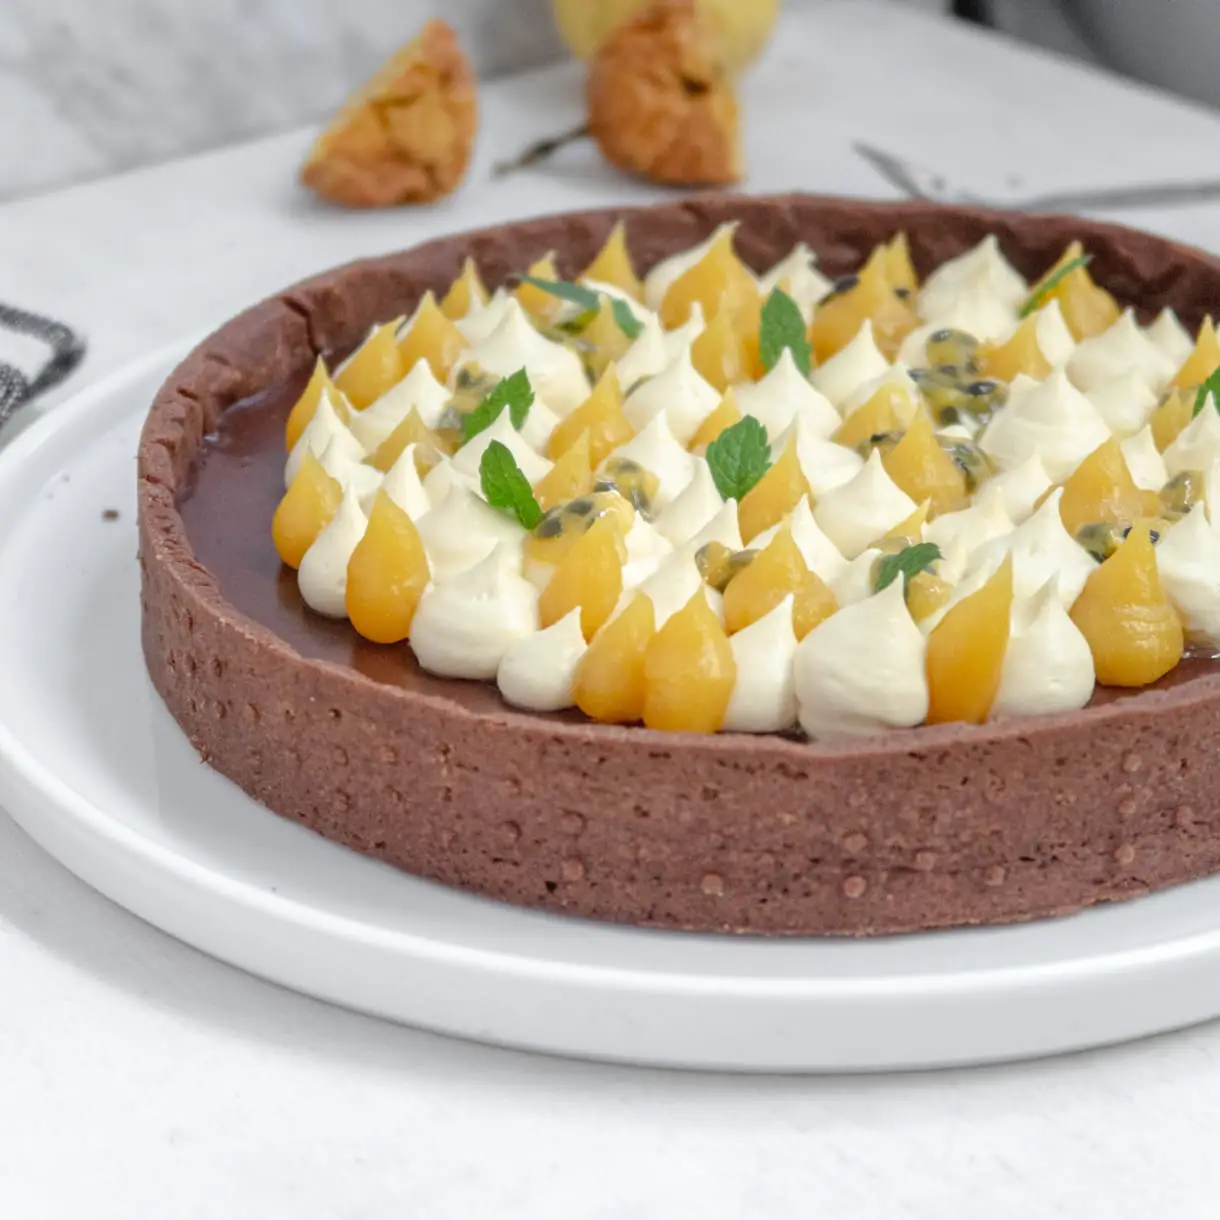 Vegan dark chocolate ganache-filled tart topped with passionfruit white chocoalte whipped ganache and passionfruit curd.